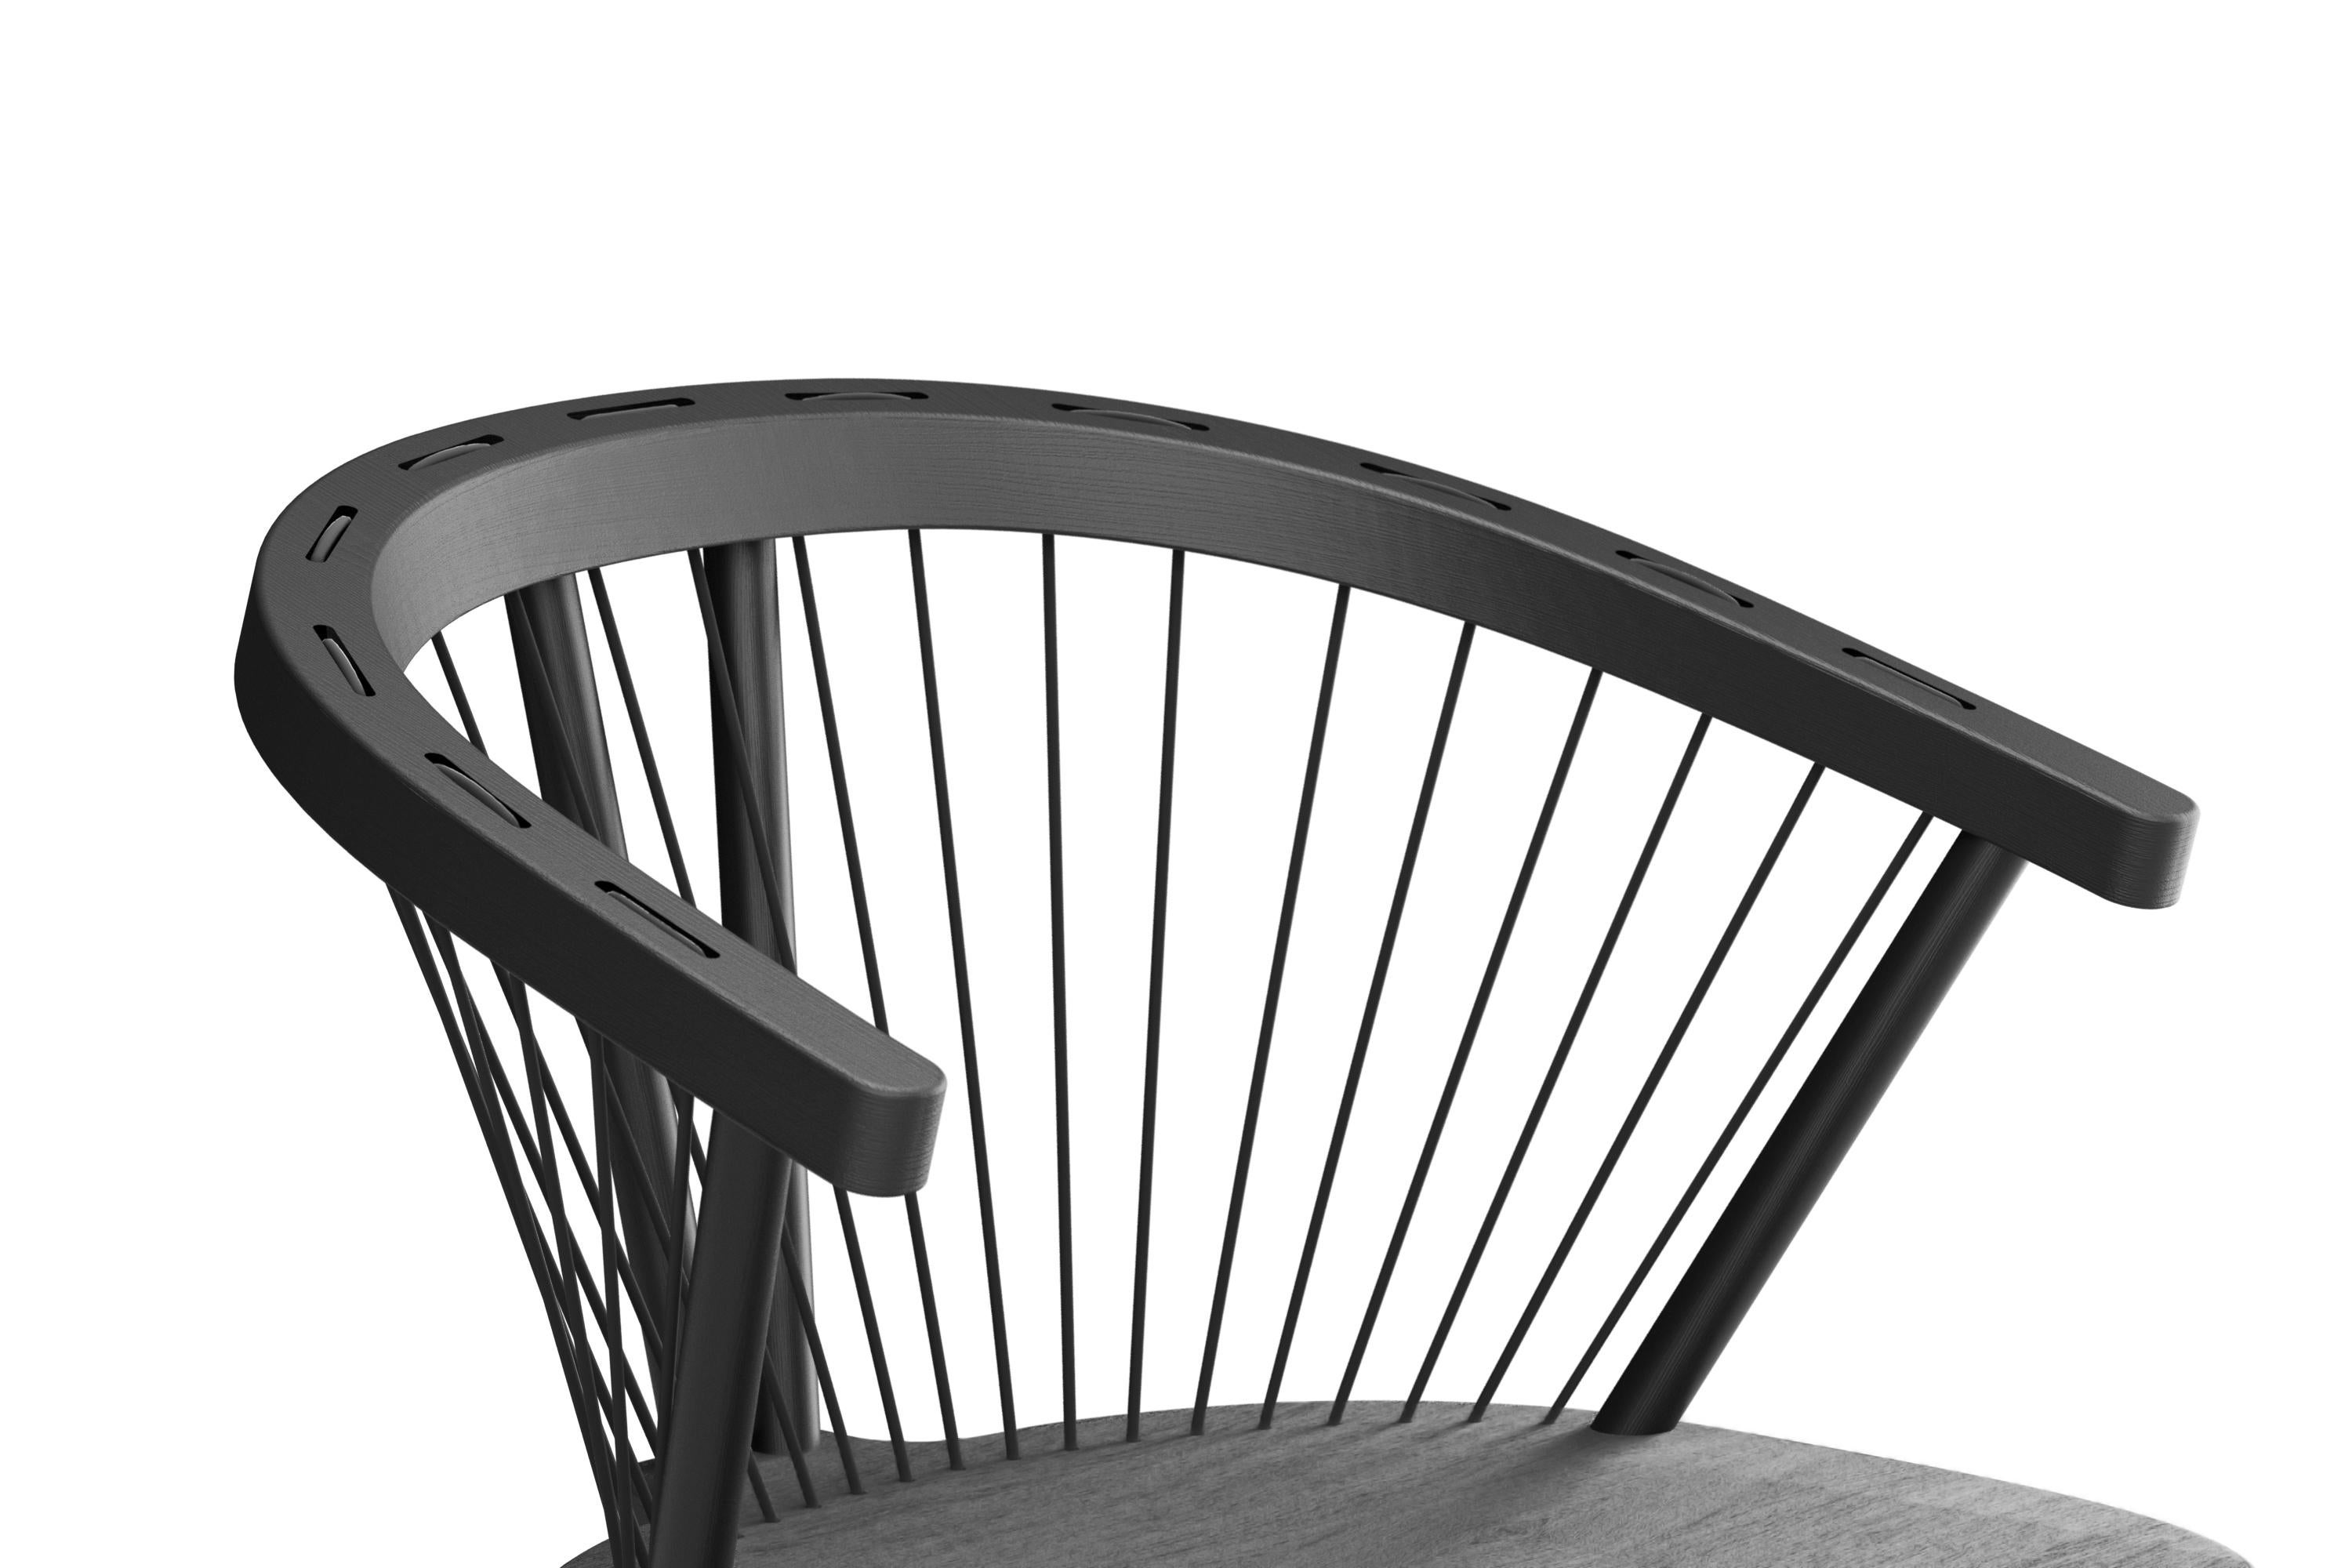 The Cuerdas Rounded Chair offers a fresh take on the classic Windsor chair, seamlessly blending solid oak with the unique element of woven cords. Named 